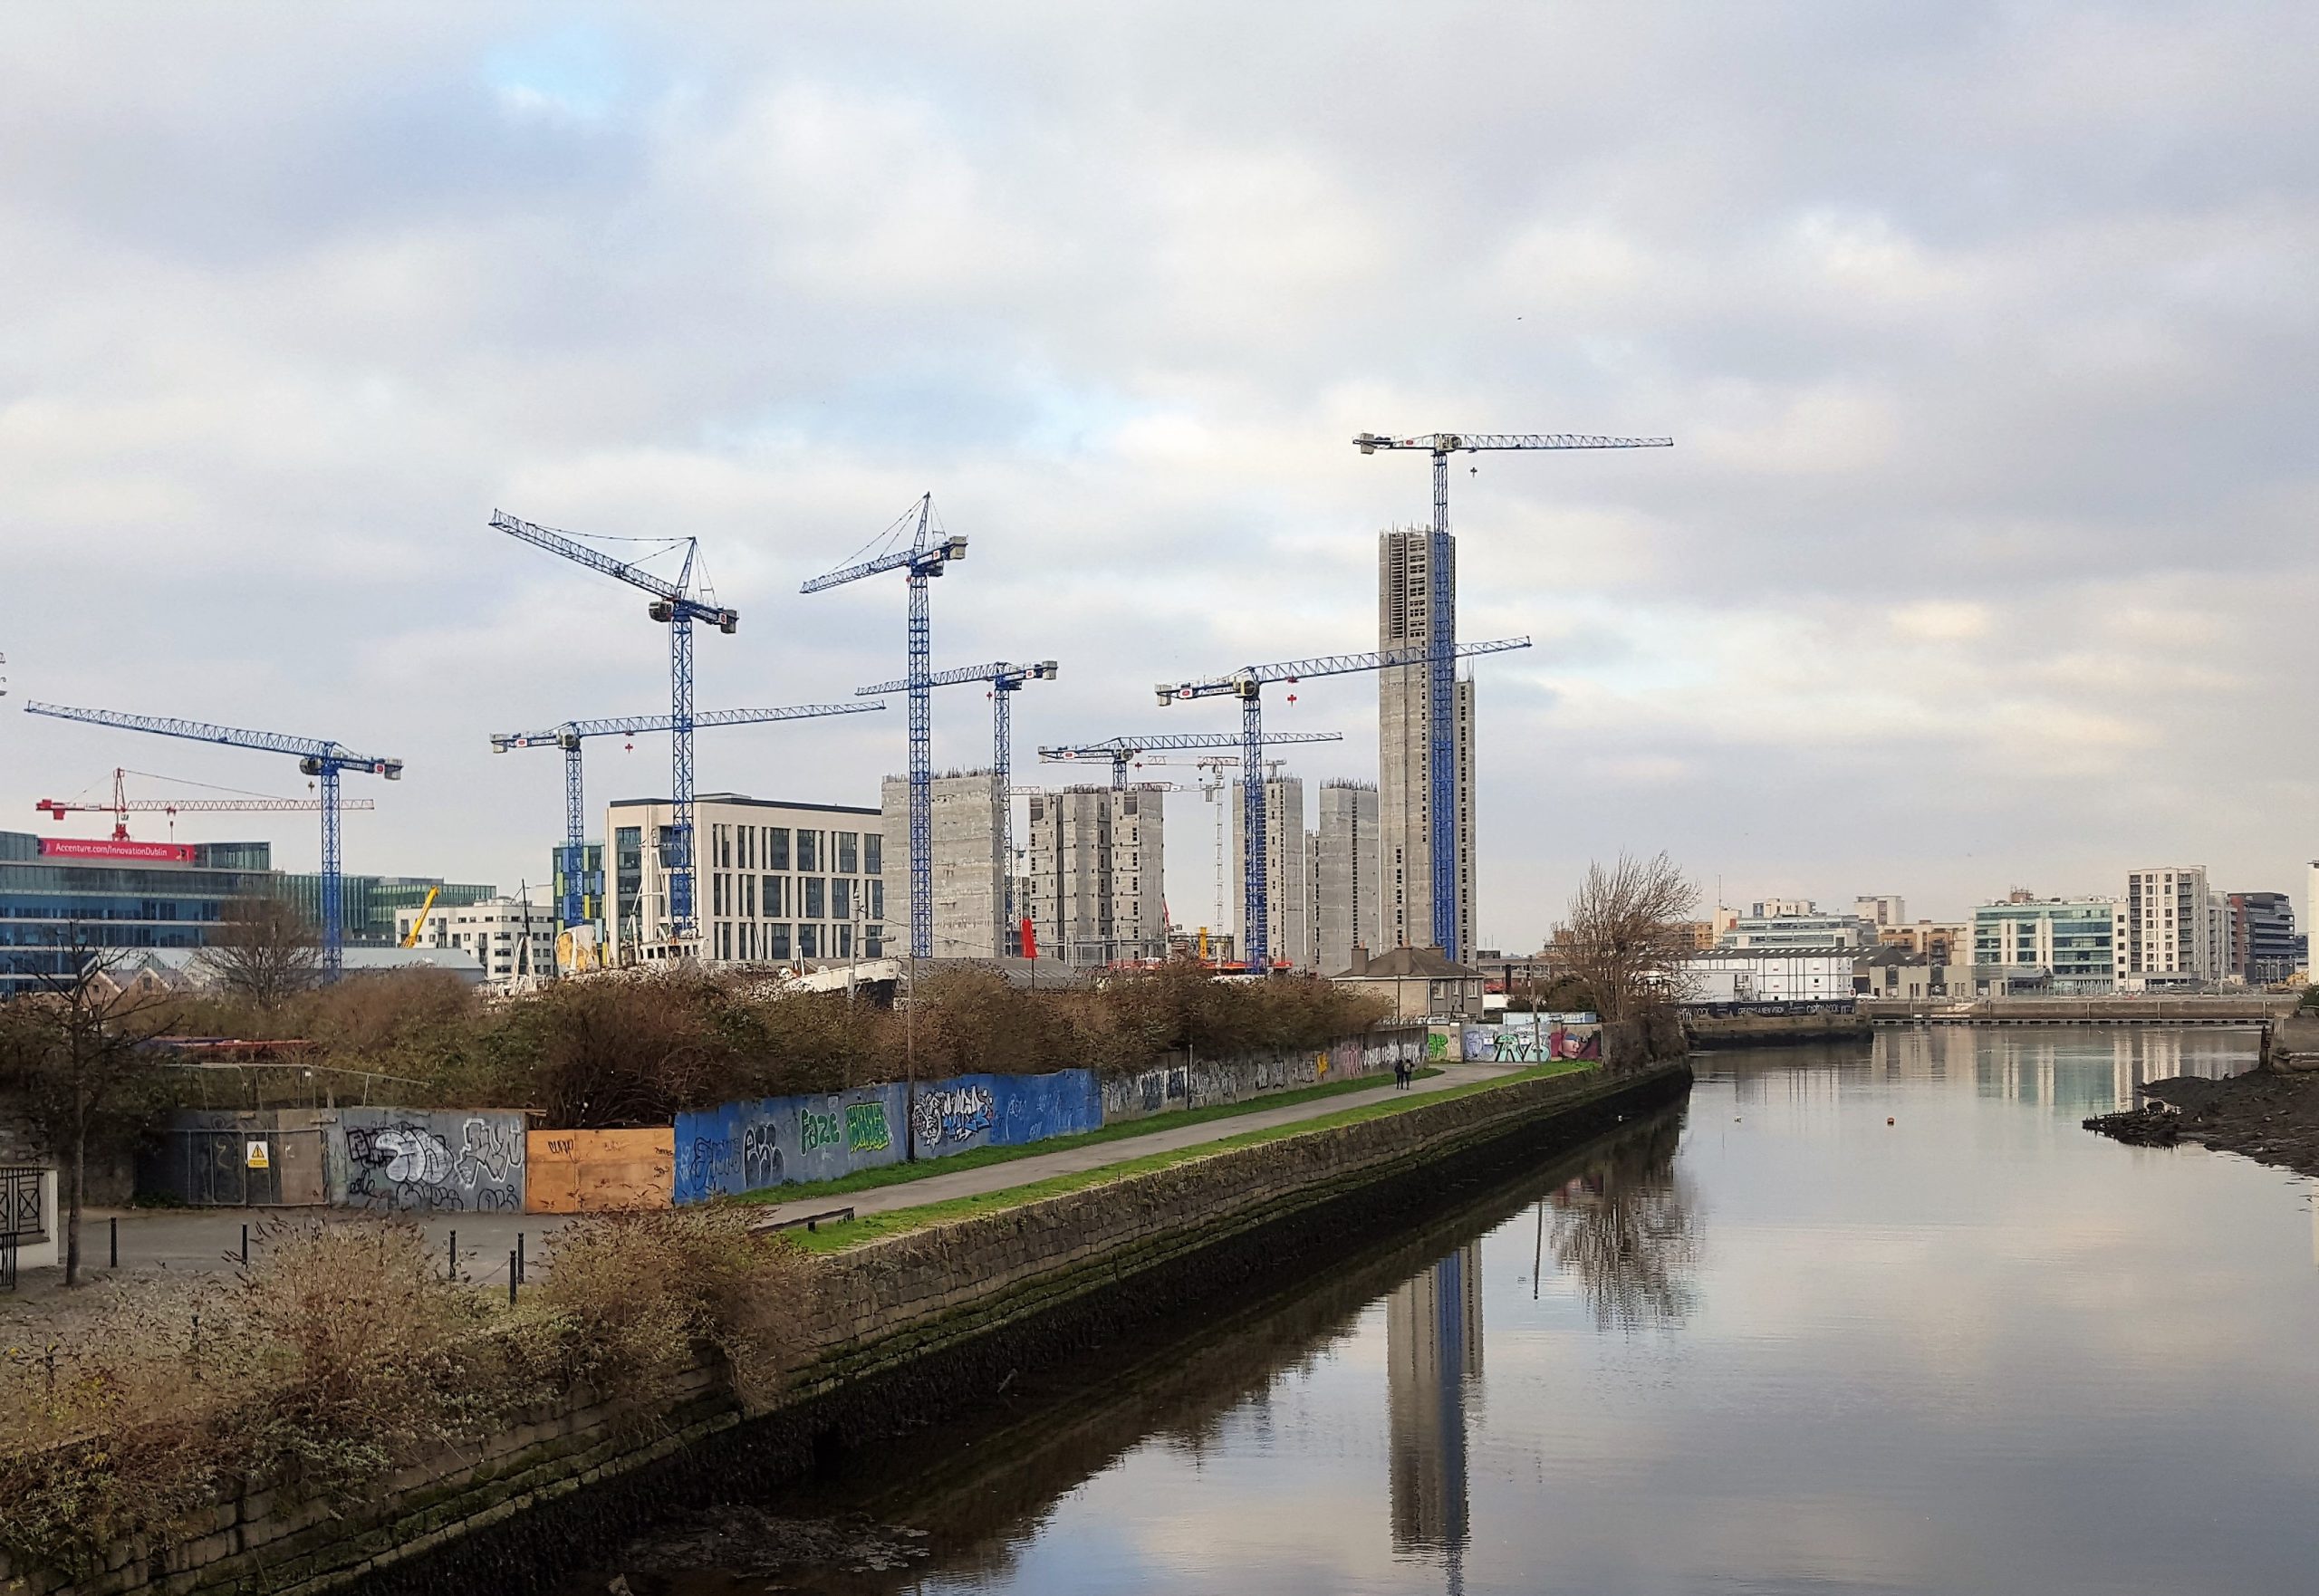 In Pictures: Irish Cranes & Lifting completes work at Hanover Quay and Capital Dock